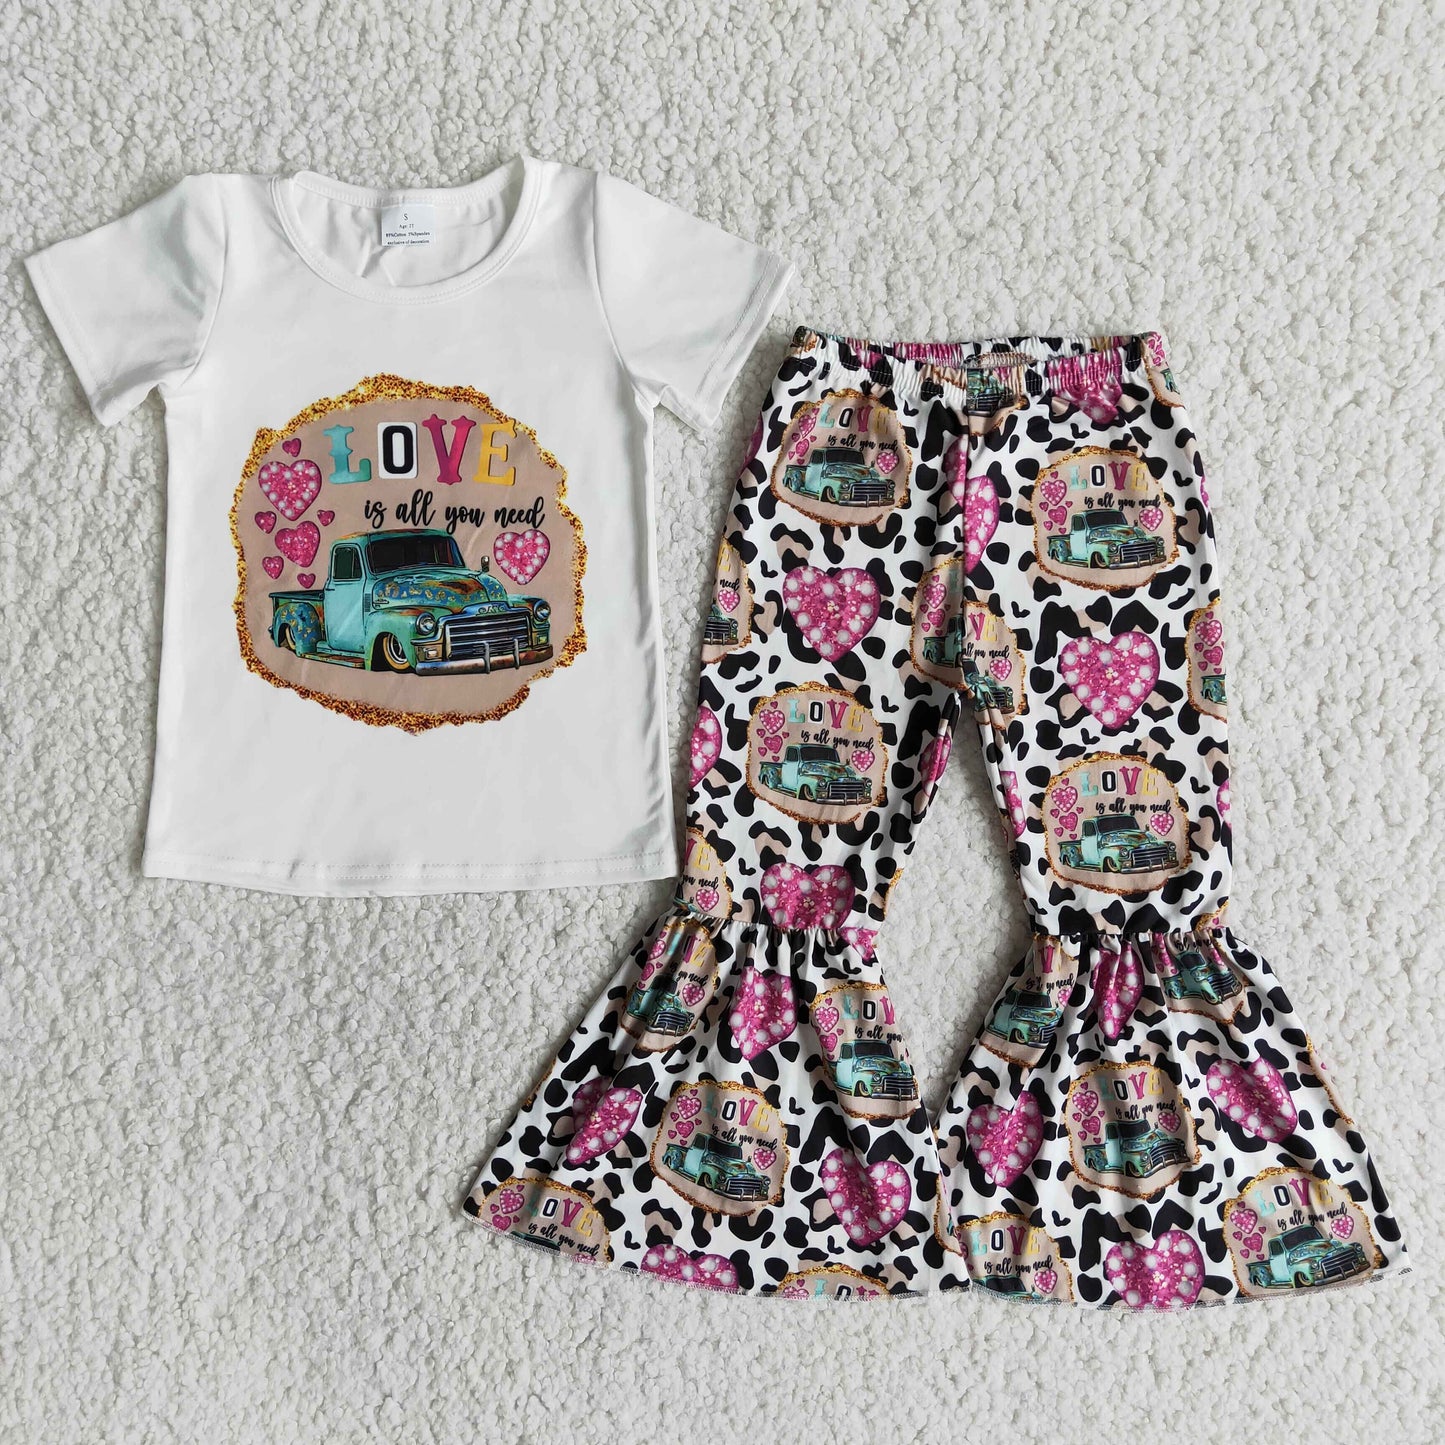 Love is all you need truck leopard pants girls boutique clothing set